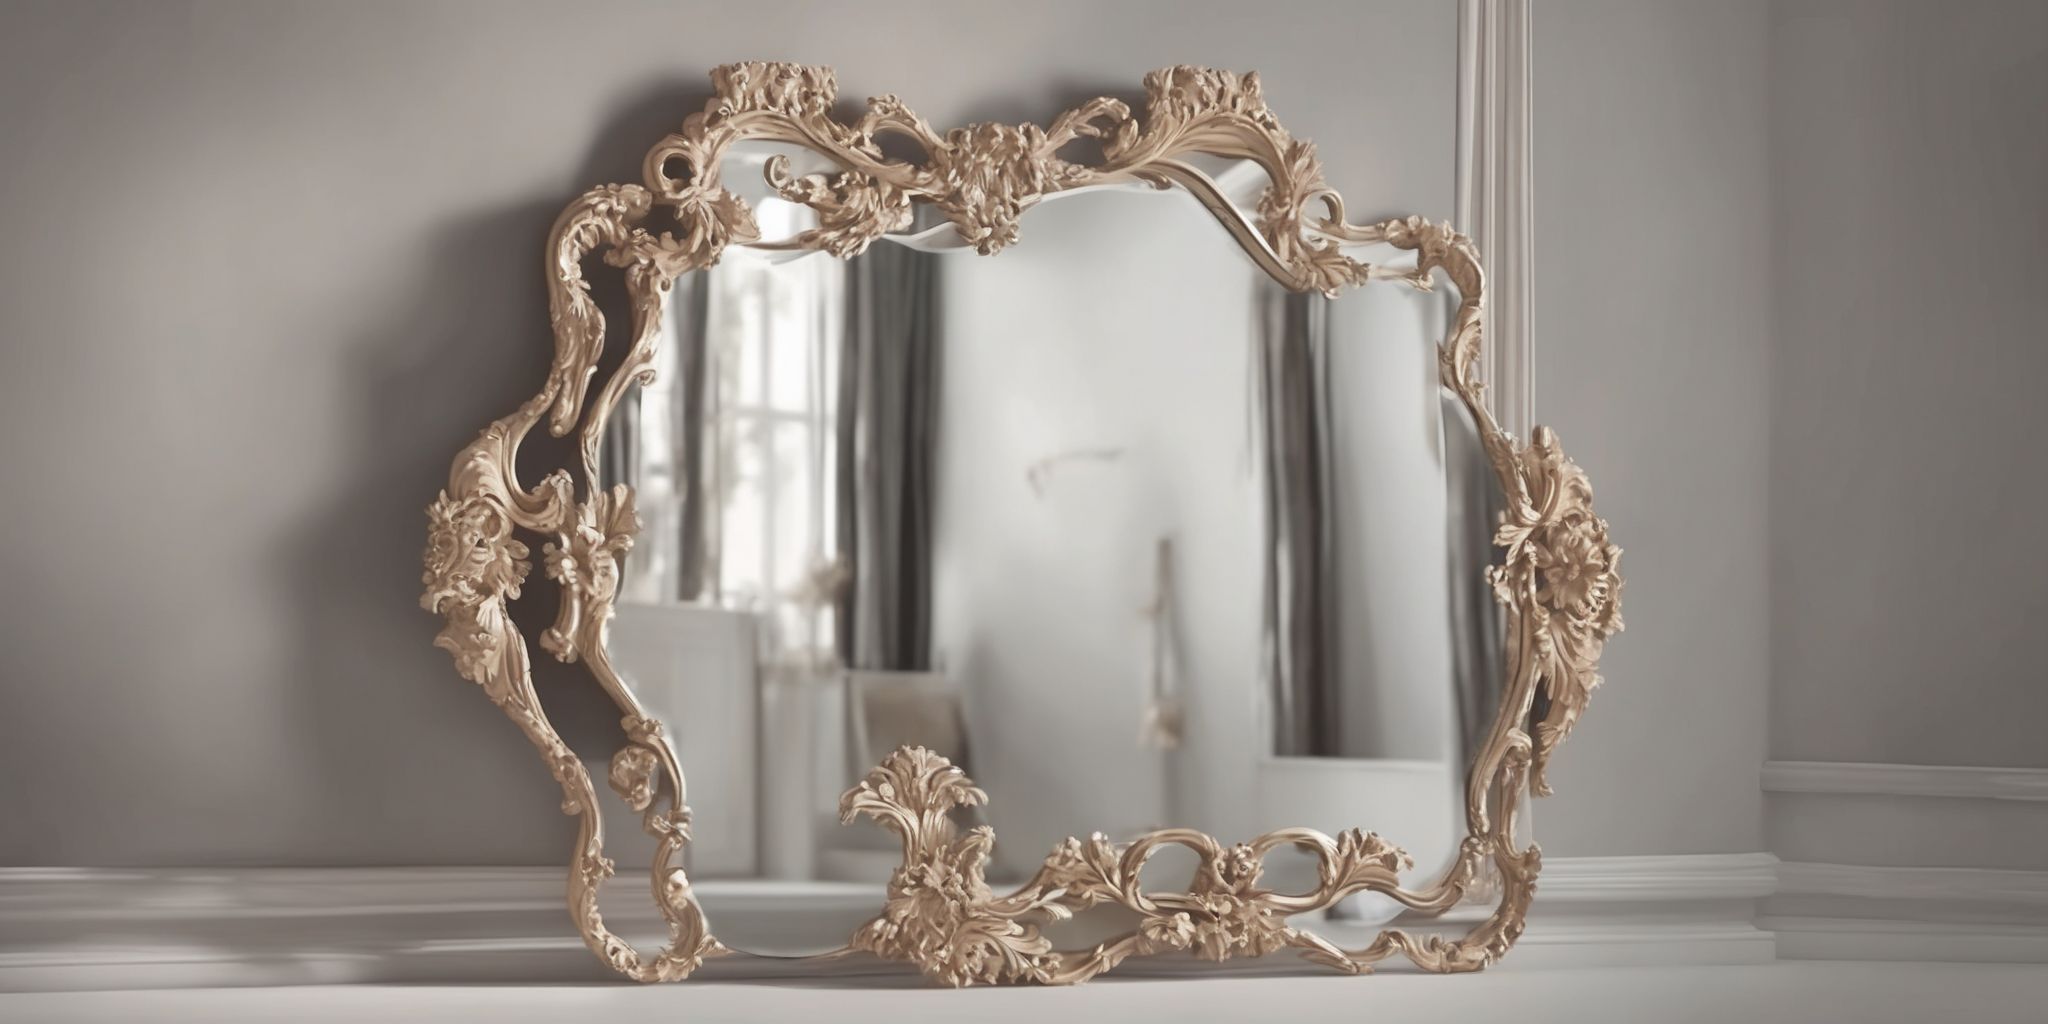 Mirror  in realistic, photographic style